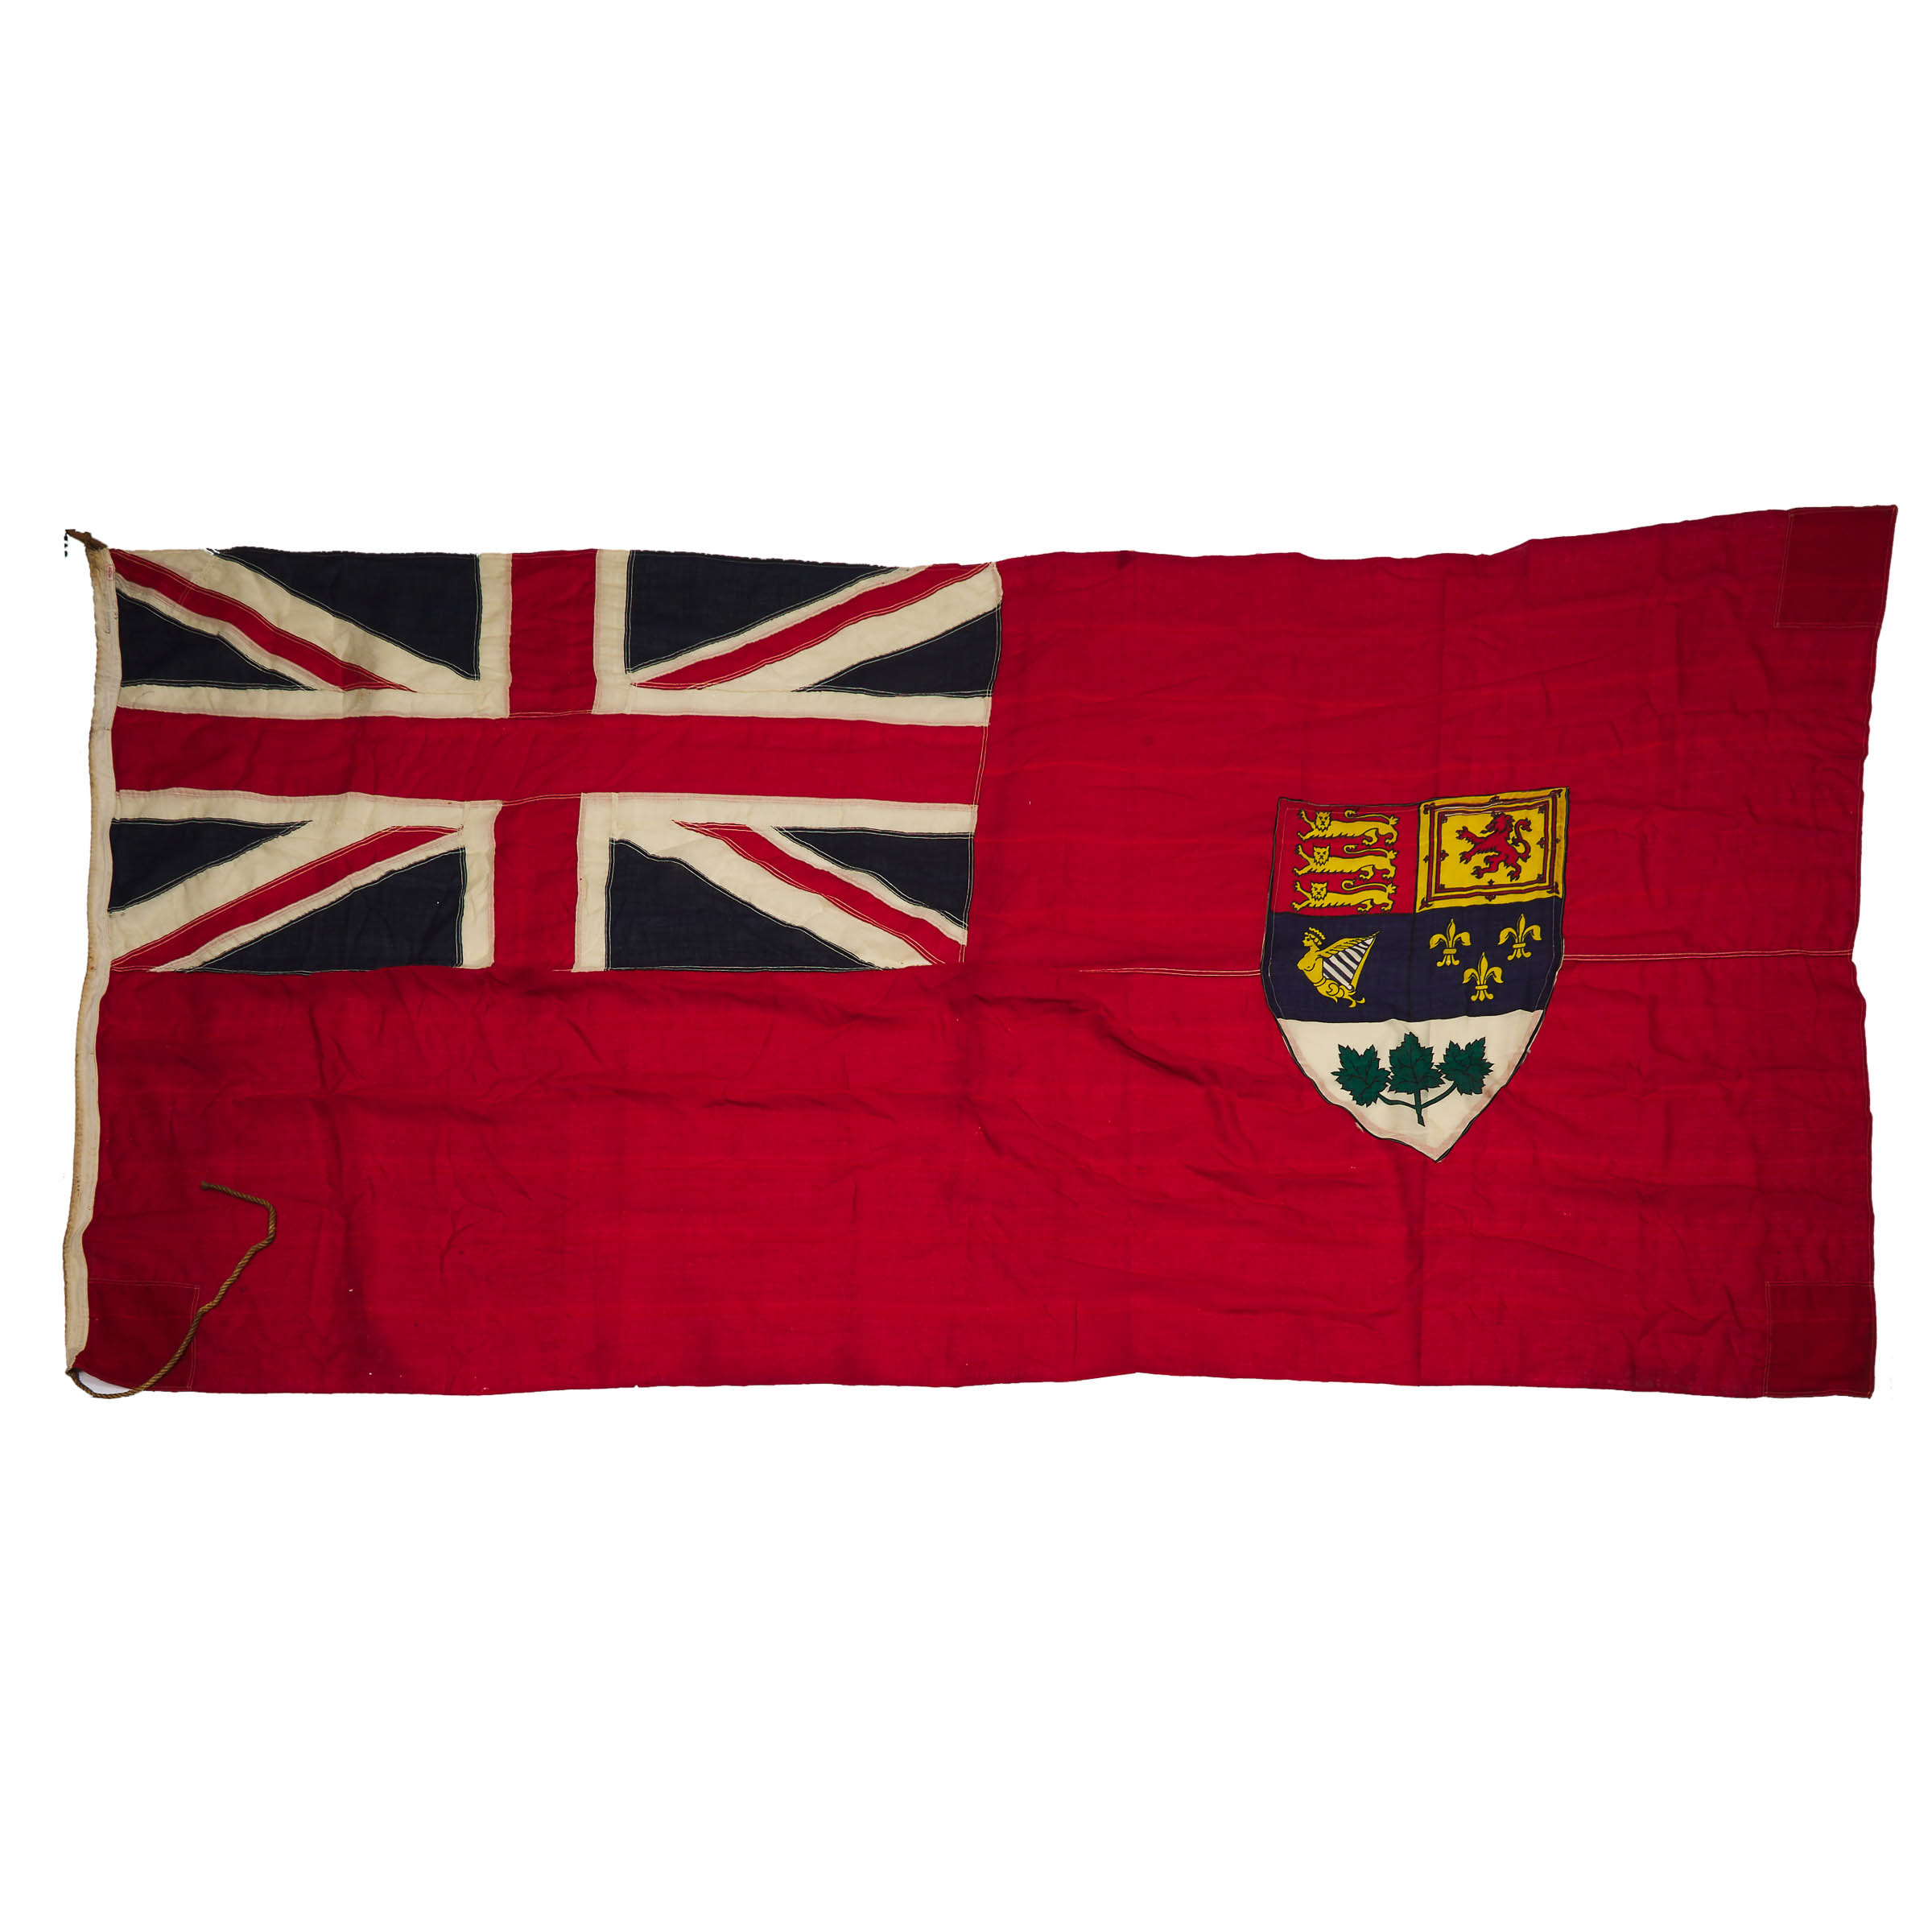 Large WWII Era Canadian Red Ensign, mid 20th century